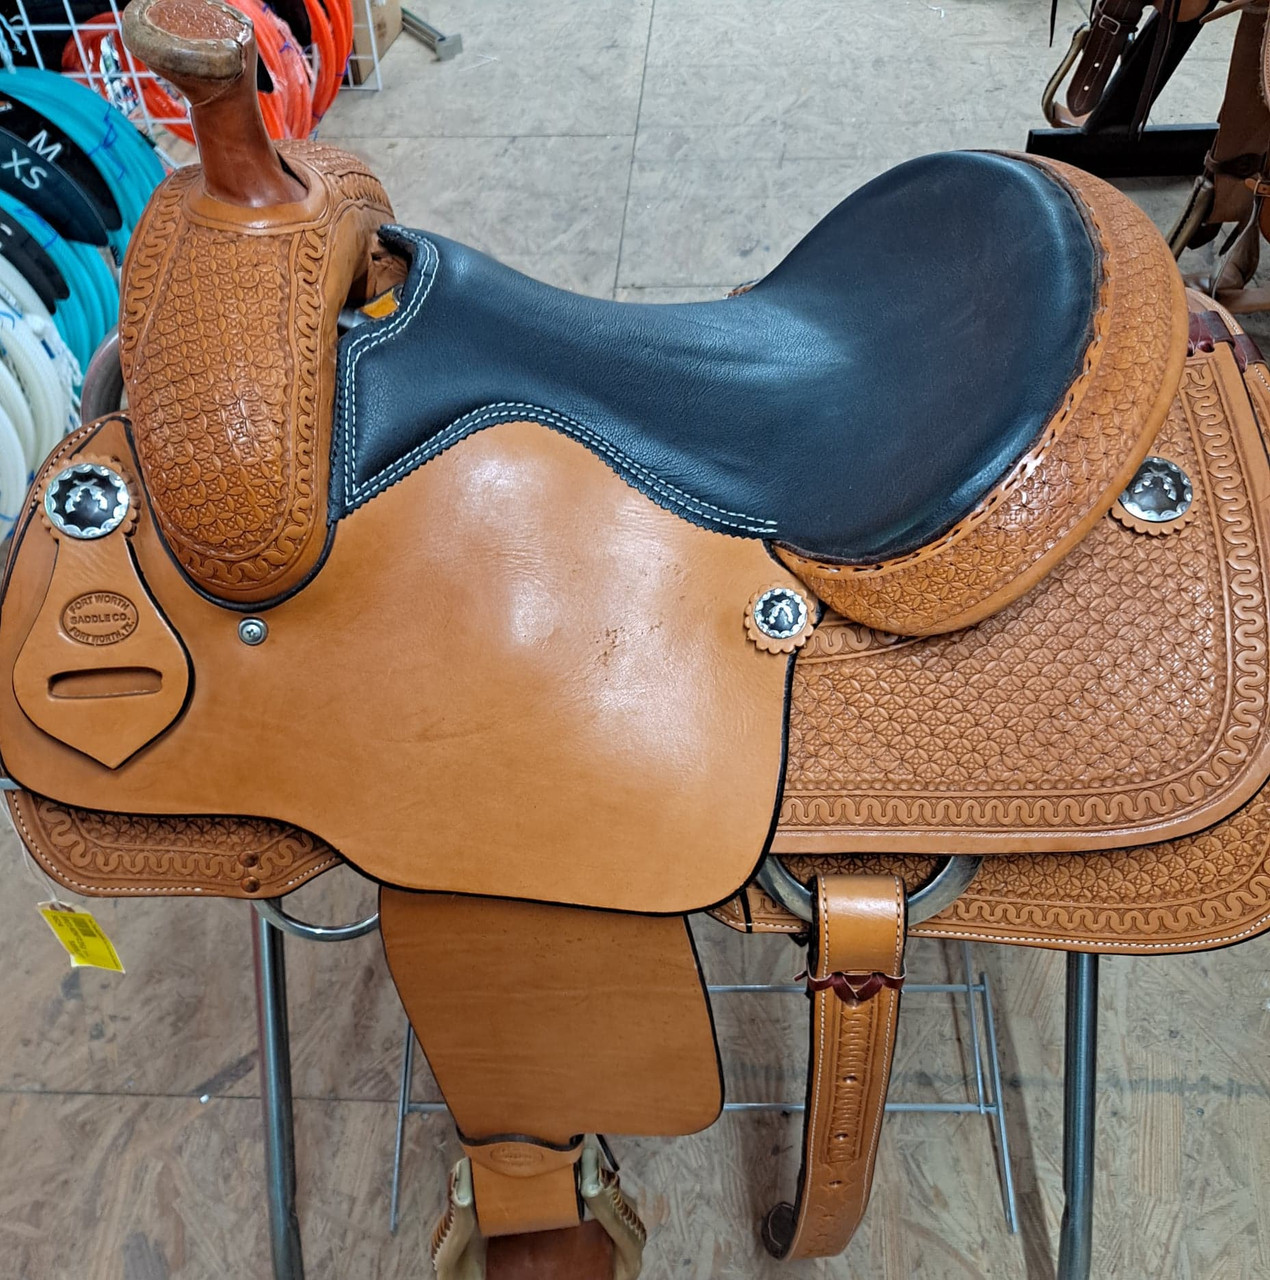 New Roping Saddle by Fort Worth Saddle Co with 14 inch padded leather seat, in-skirt front rigging, slick jockeys and fenders. Hand-tooled pommel, skirts, chasis and cheyenne roll. Gullet size is 6 inch. Made in USA. Limited lifetime warranty.

S624